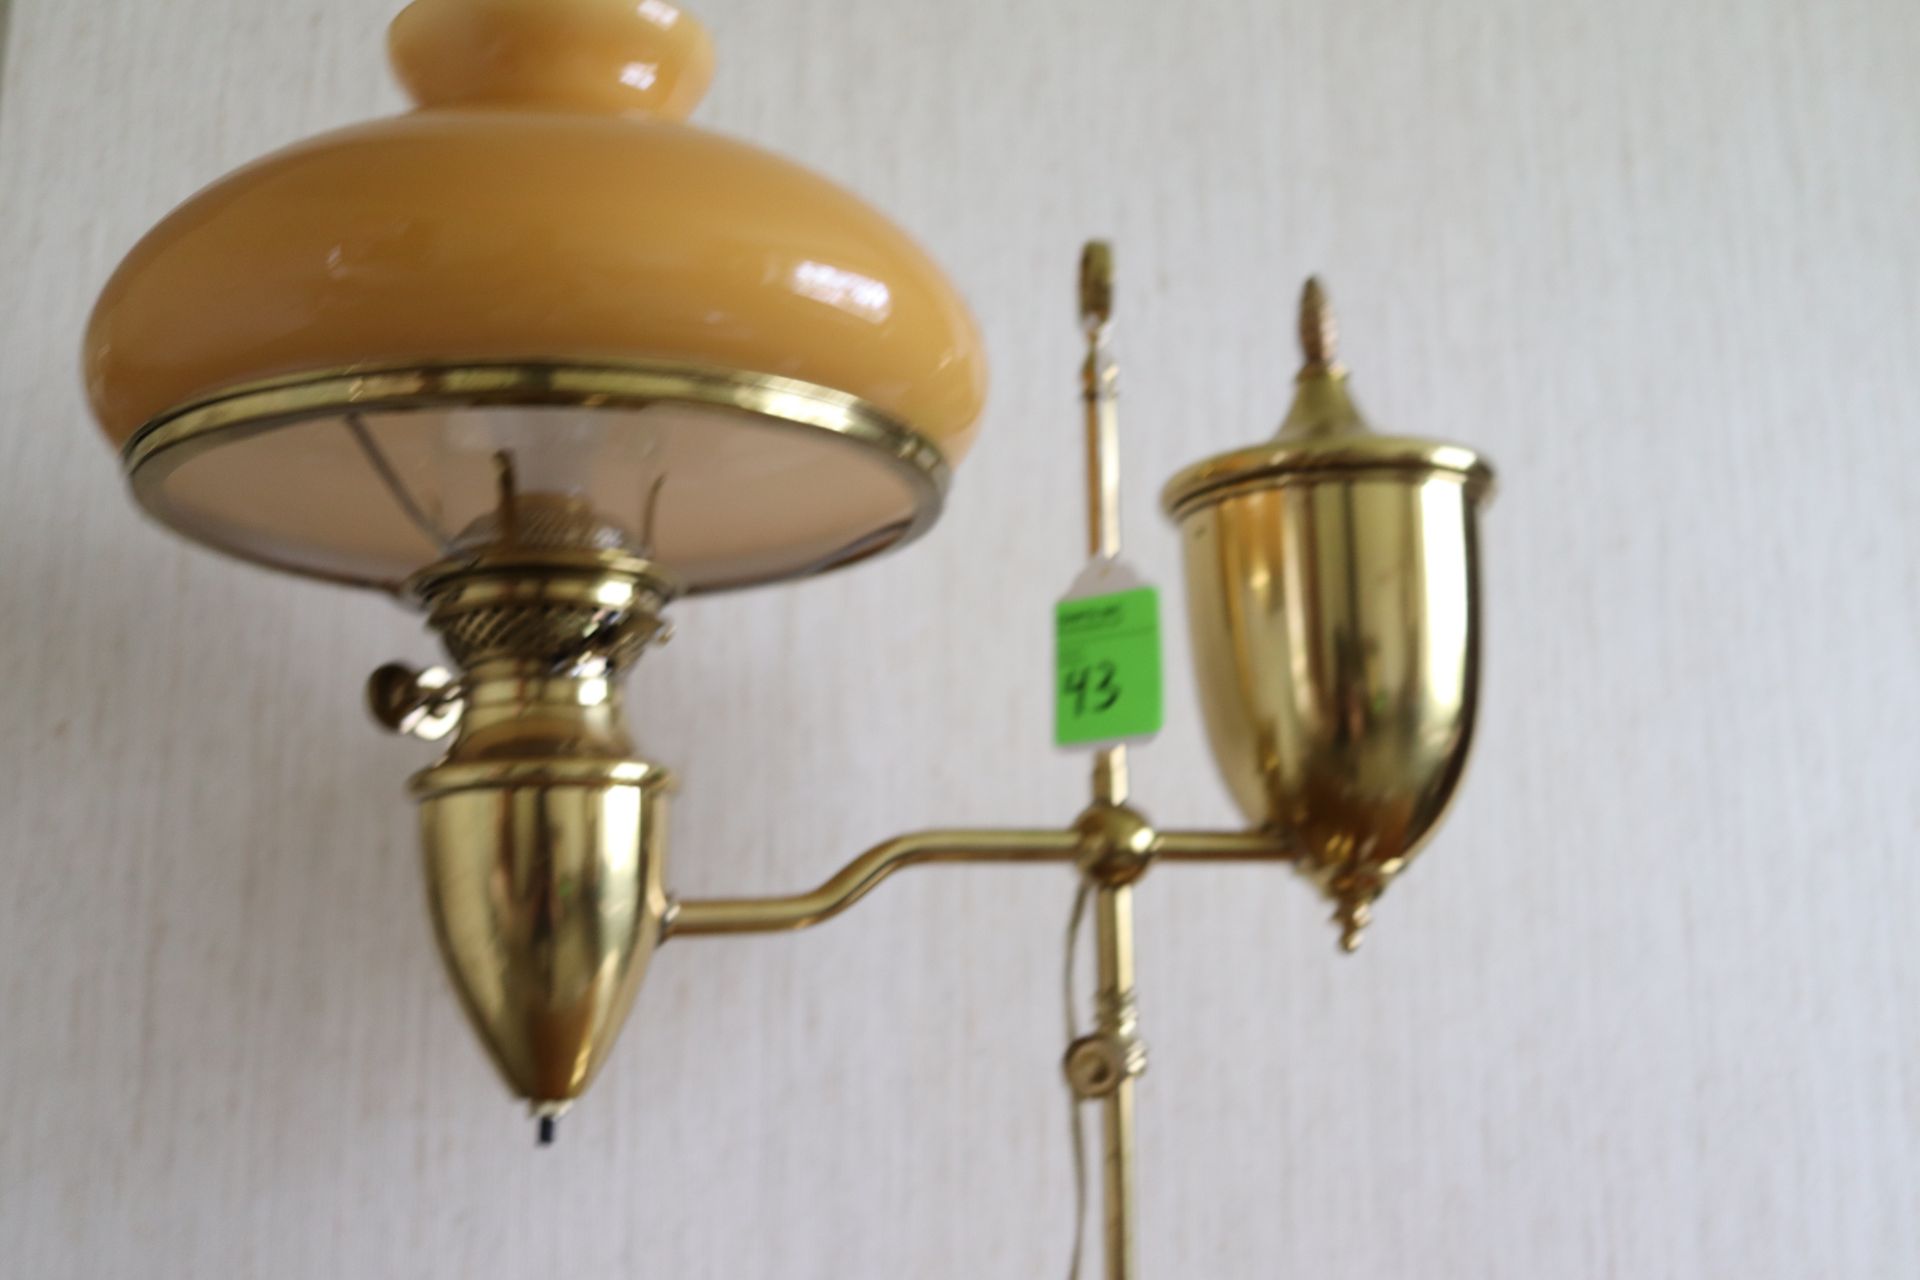 brass candle design table lamp fitted with a beige shade, approximate height 24" - Image 2 of 3